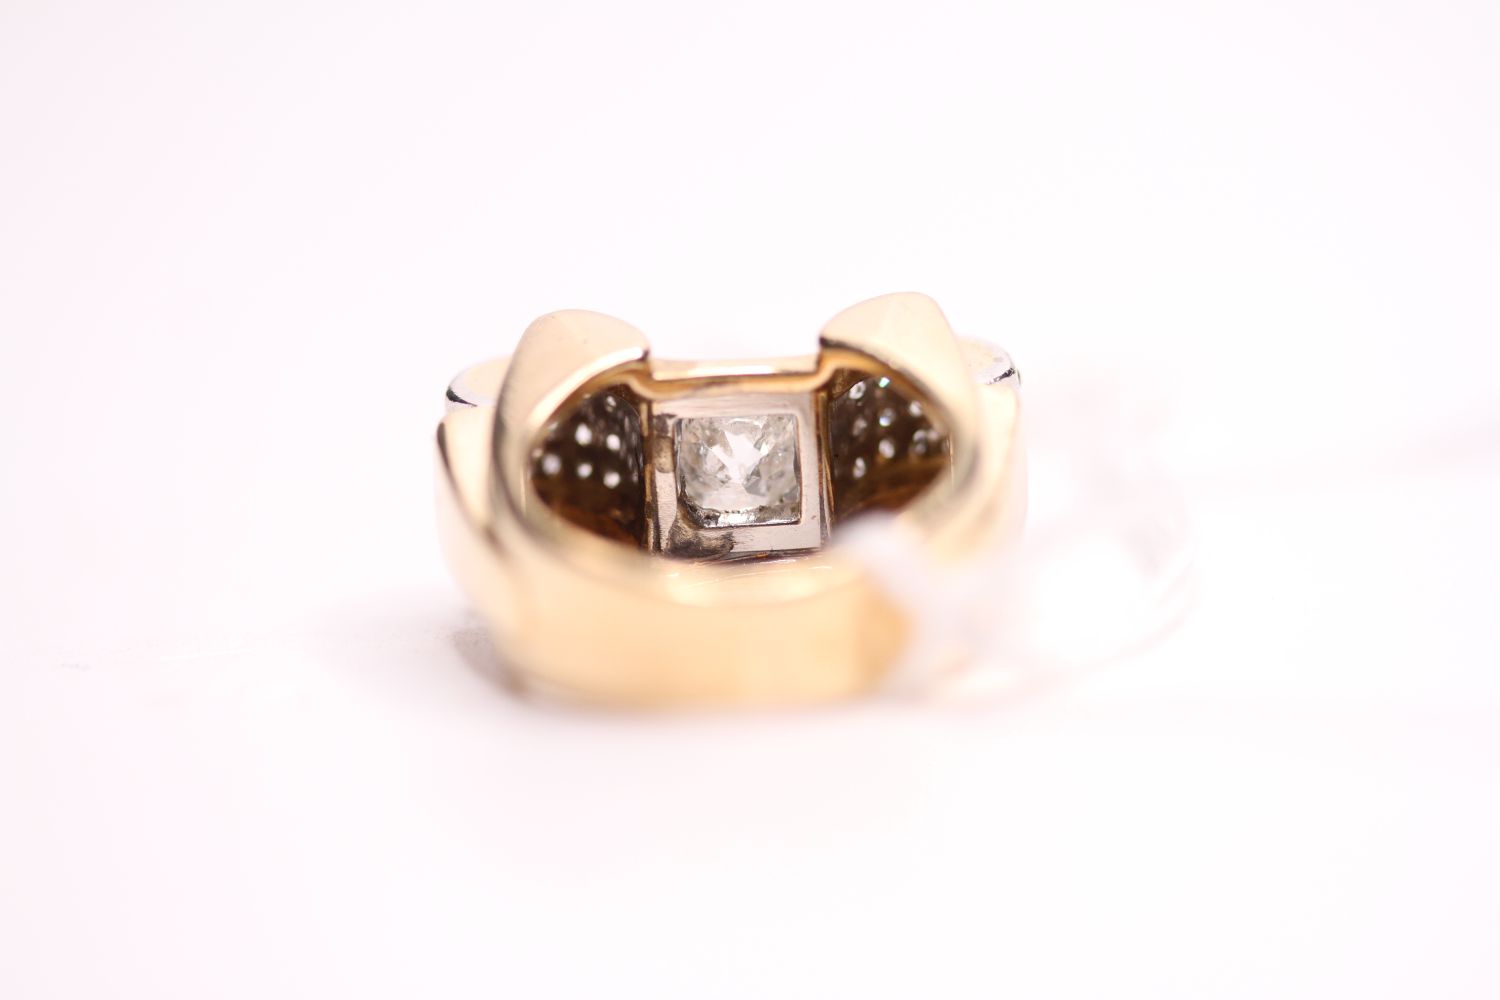 French Diamond Scroll Top Ring, size K. - Image 4 of 4